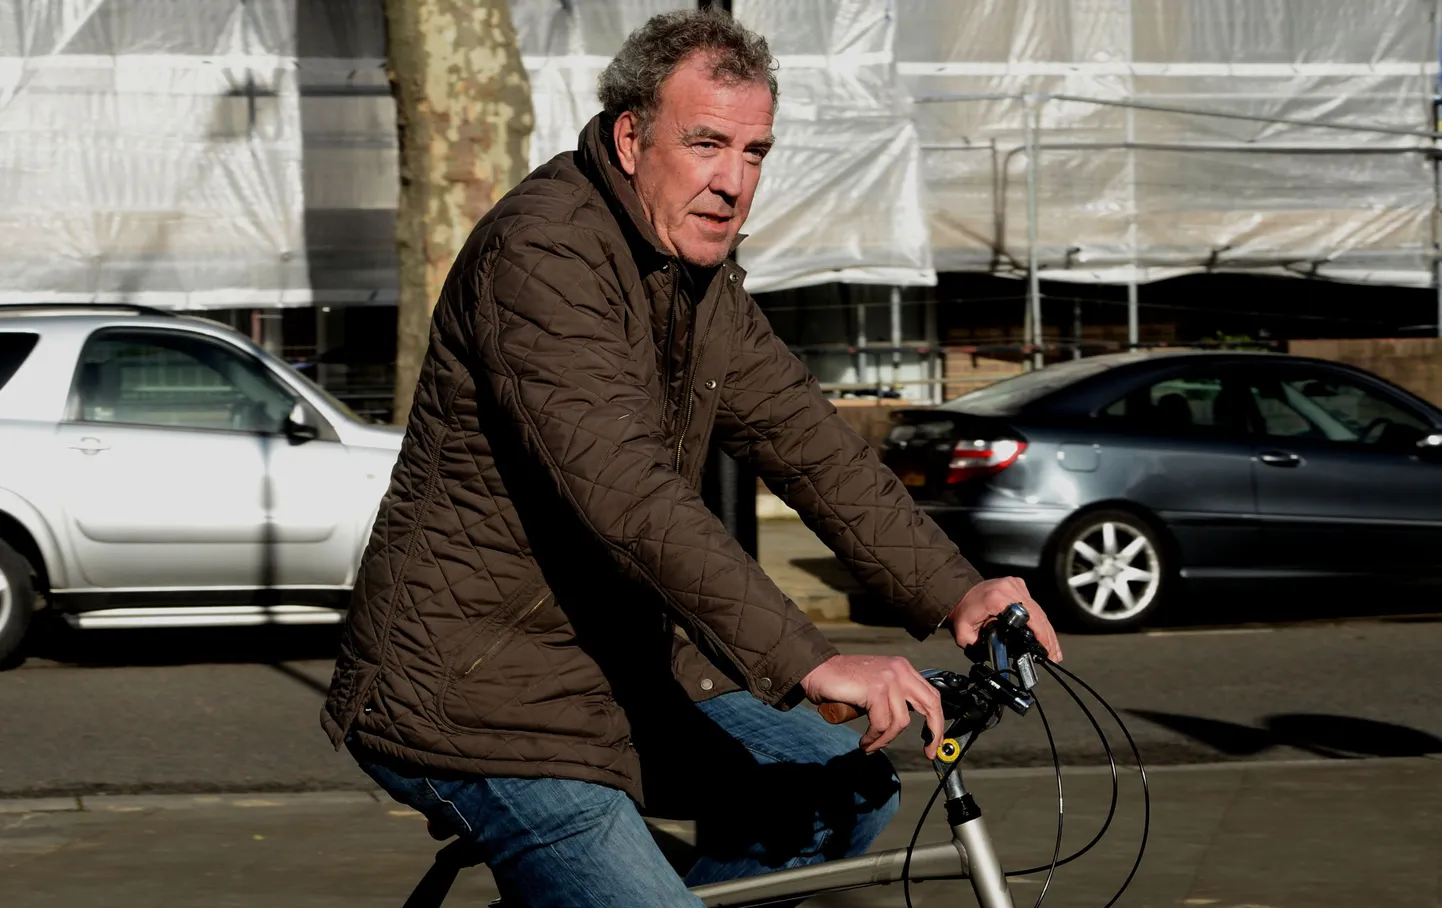 Jeremy Clarkson arrives at his home in west London, on a bicycle, as Clarkson's BBC career is over after an internal investigation found he launched an &quot;unprovoked physical and verbal attack&quot; which left one of the colleagues in hospital.